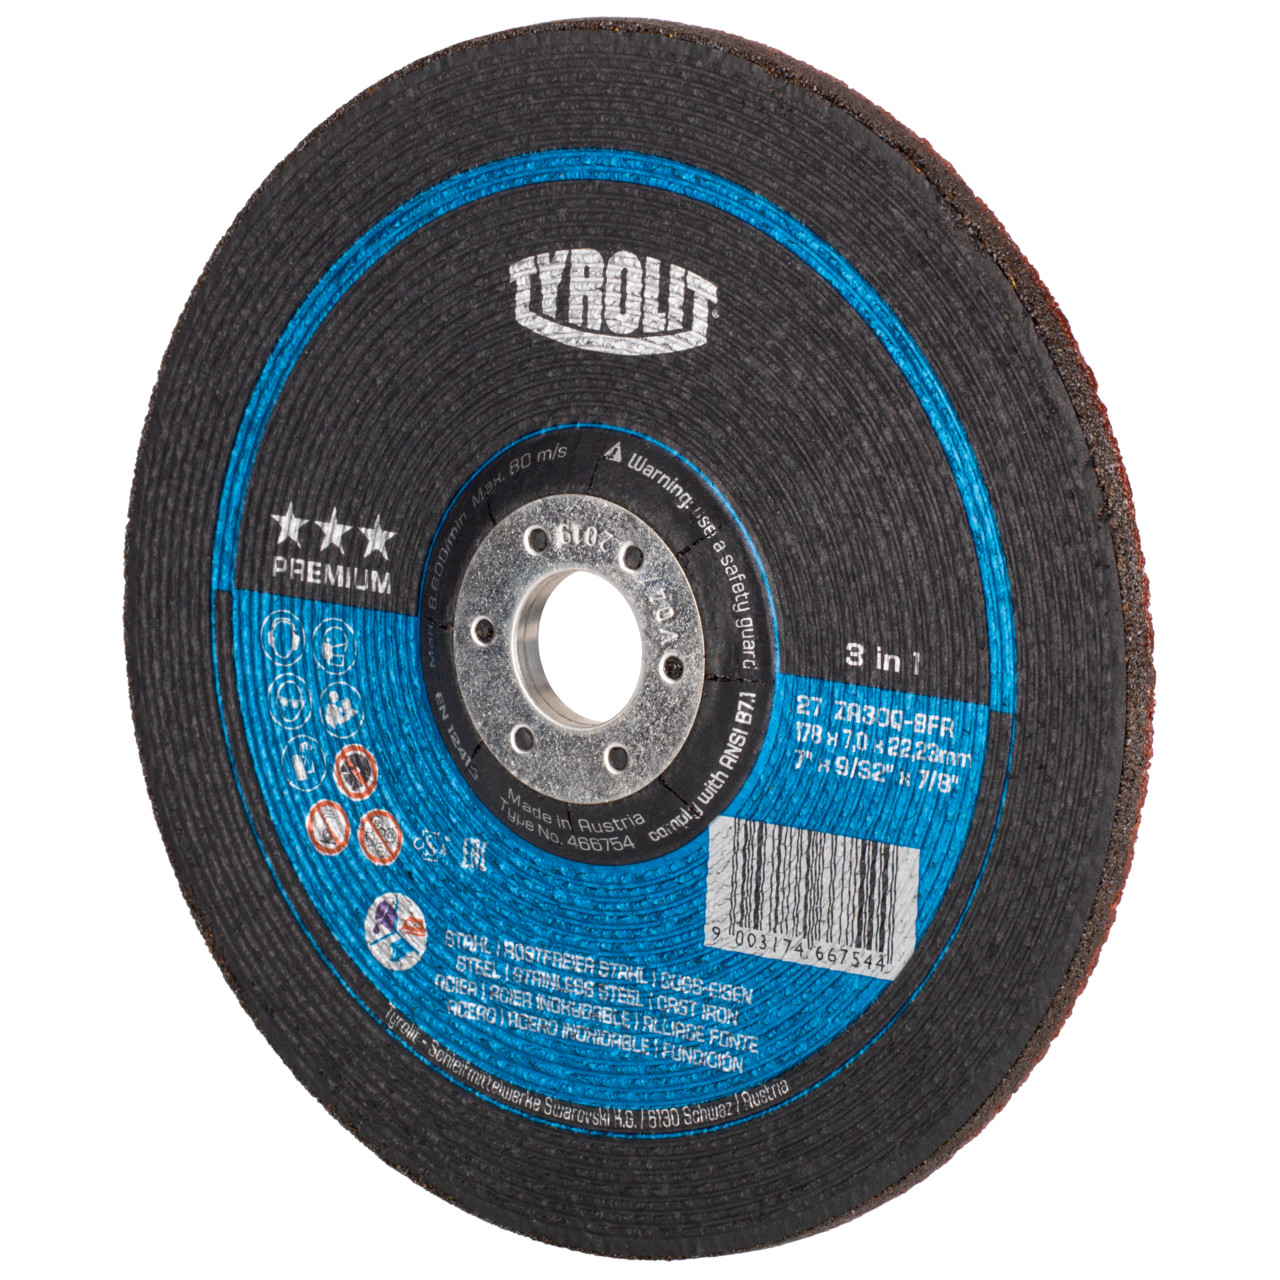 TYROLIT grinding disc DxUxH 178x7x22.23 3in1 for steel and stainless steel and cast iron, shape: 27 - offset version, Art. 466754